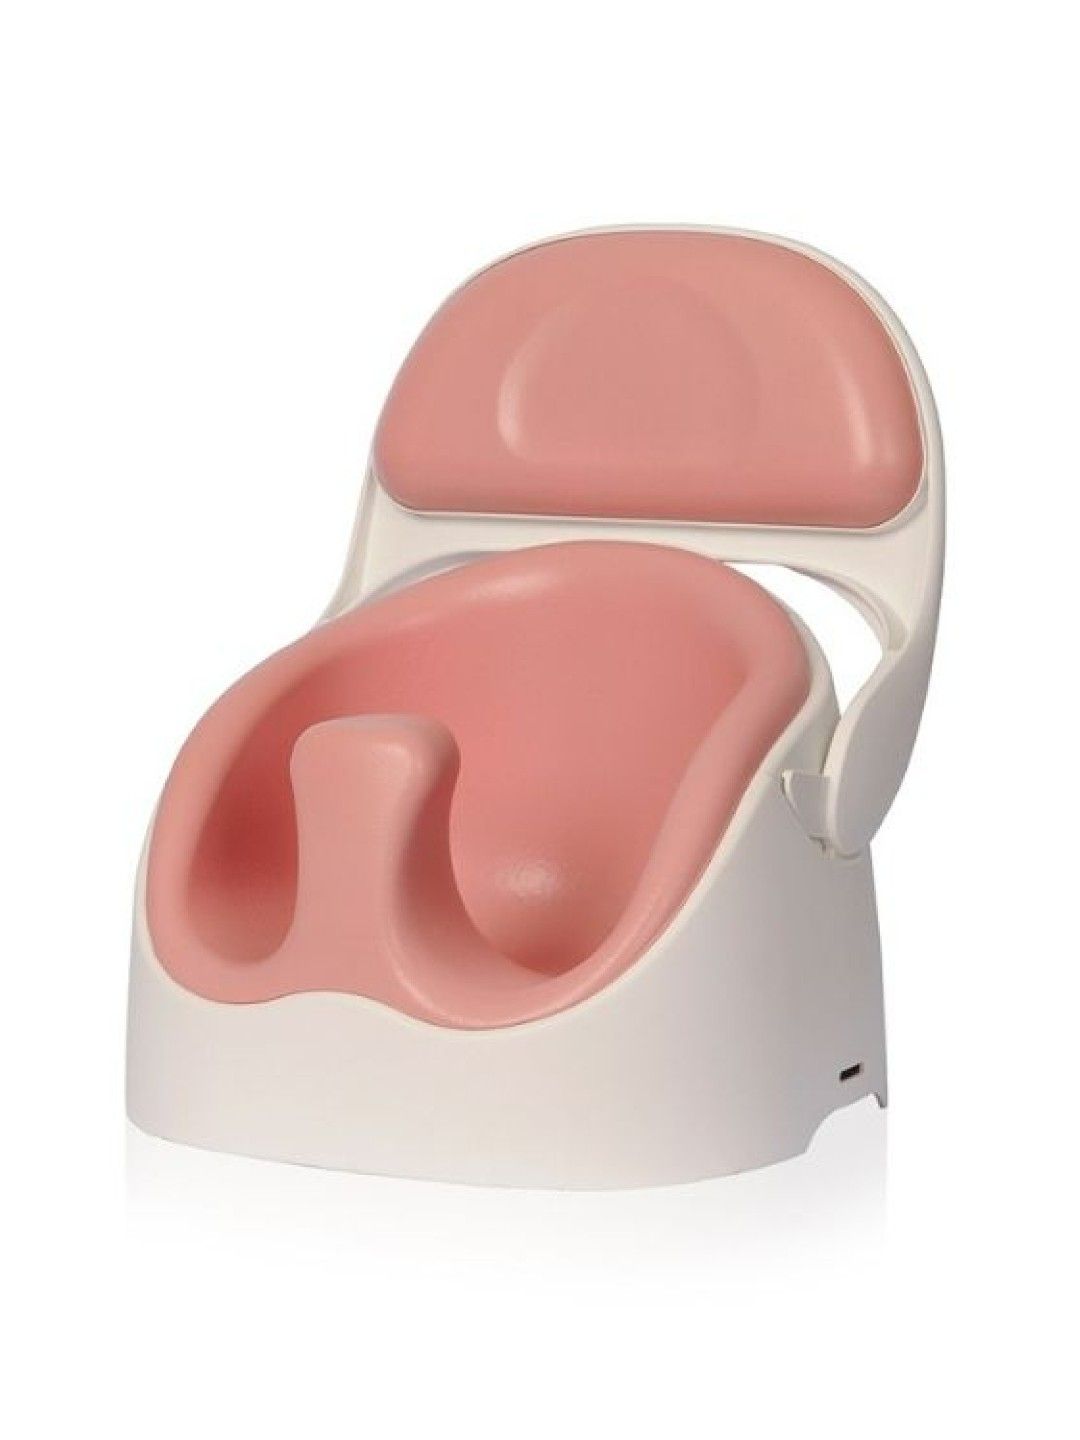 Jellymom Premium Wise Chair